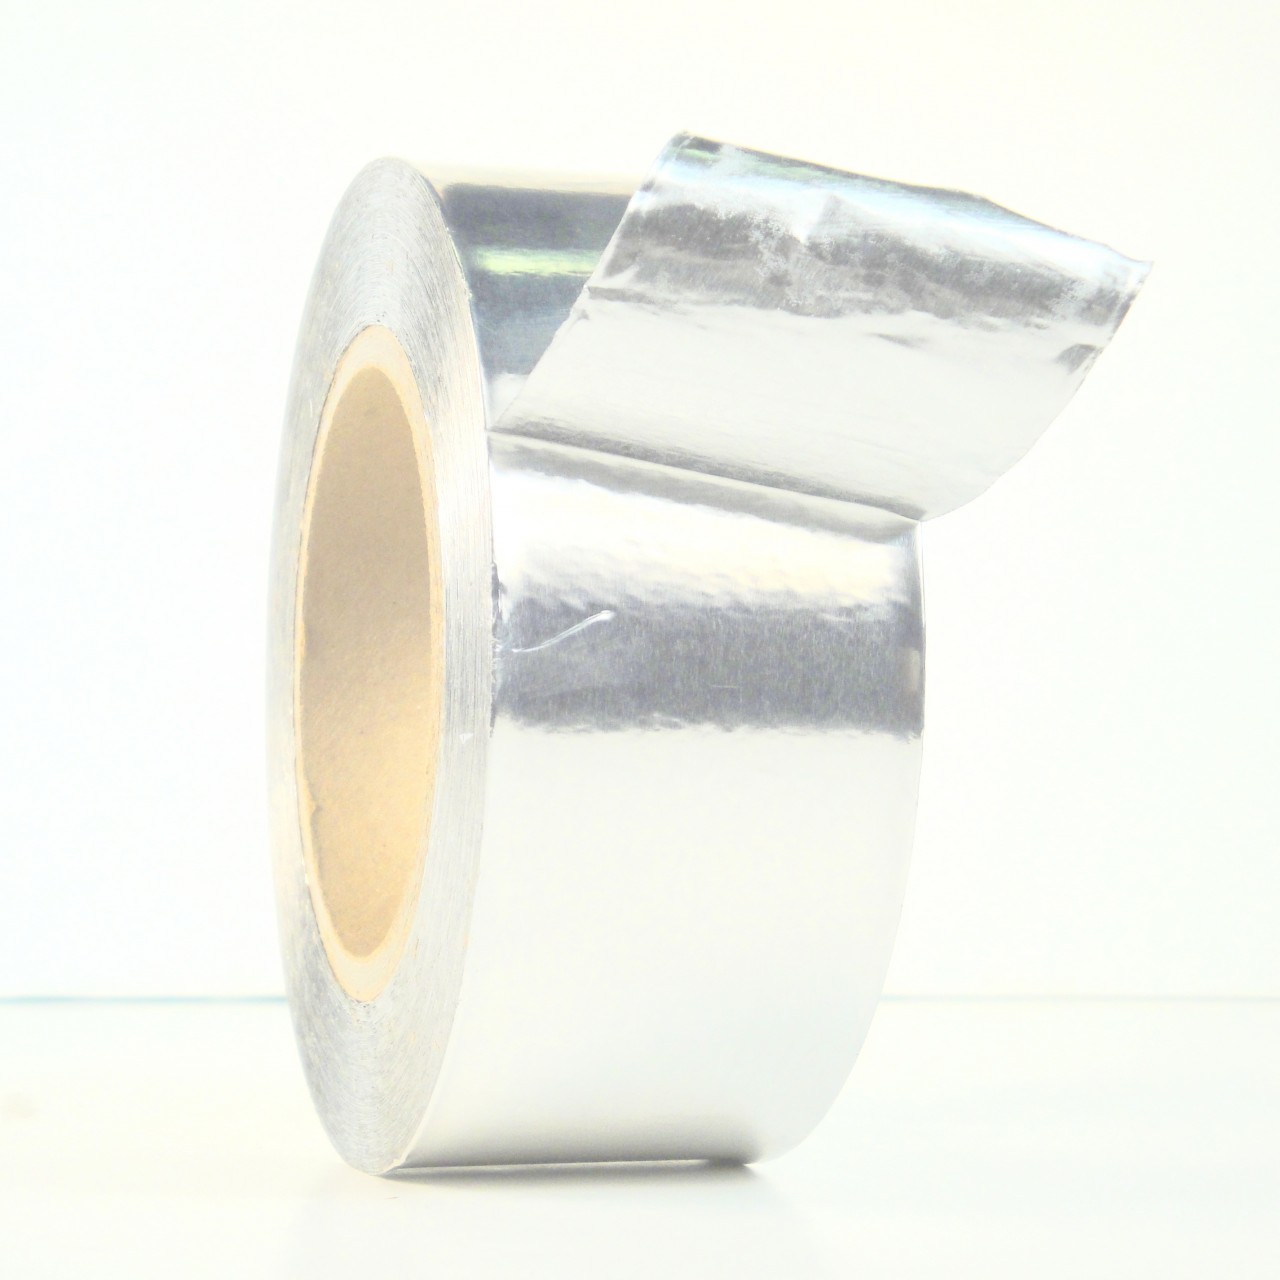 Aluminum Foil Adhesive Tape Silver 100mm x 50m Ship From USA 4" x 55yds 